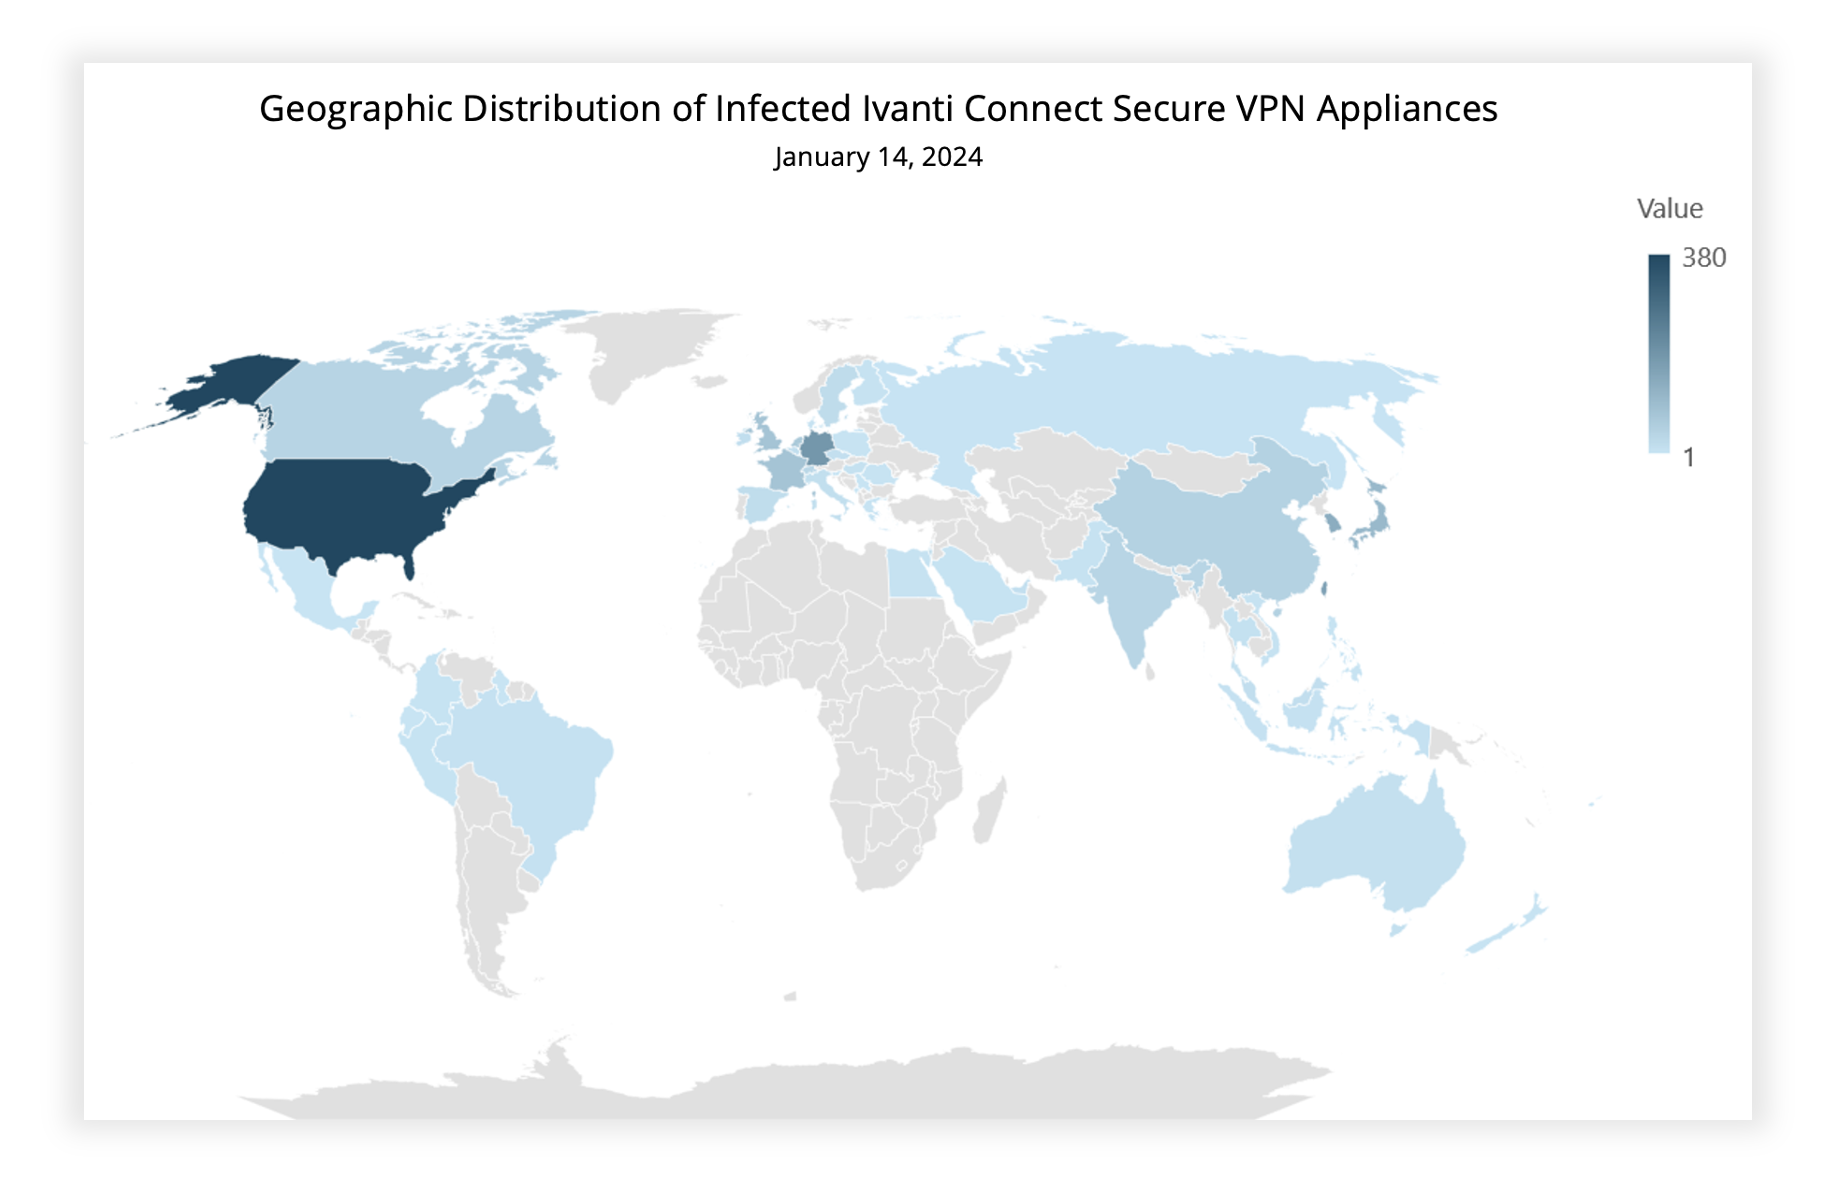 Experts warn of mass exploitation of Ivanti Connect Secure VPN flaws